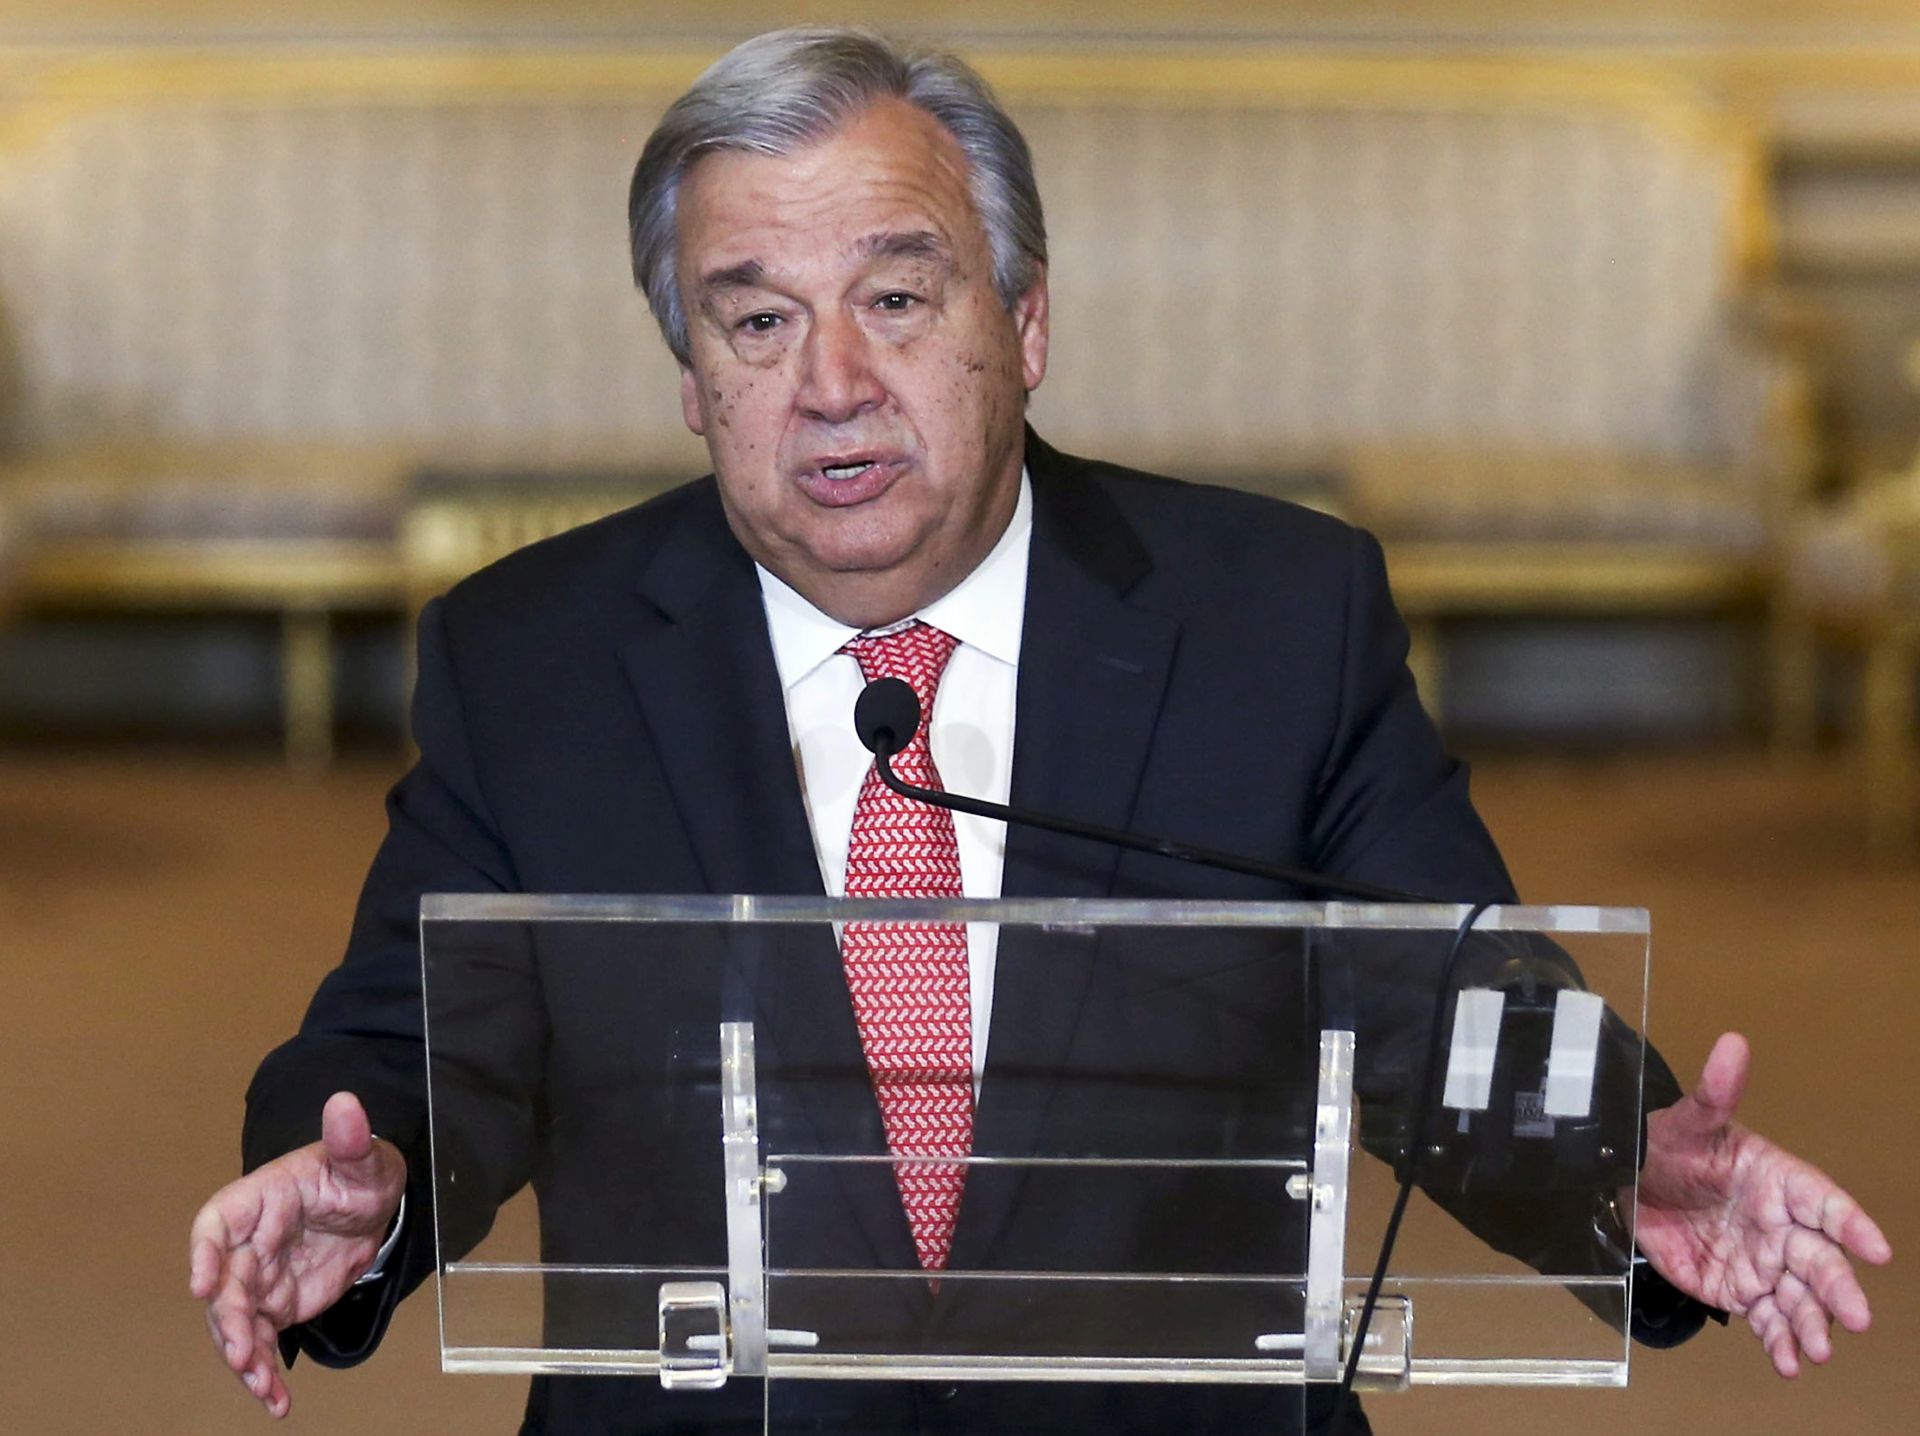 epa05573253 Antonio Guterres, the former United Nations High Commissioner for Refugees (UNHCR) and former Prime Minister of Portugal, delivers a statement at the Necessidades Palace in Lisbon, Portugal, 06 October 2016. According to reports, Guterres is set to be confirmed as new UN Secretary General by a formal vote of the UN Security Council on 06 Ovctober 2016.  EPA/ANDRE KOSTERS